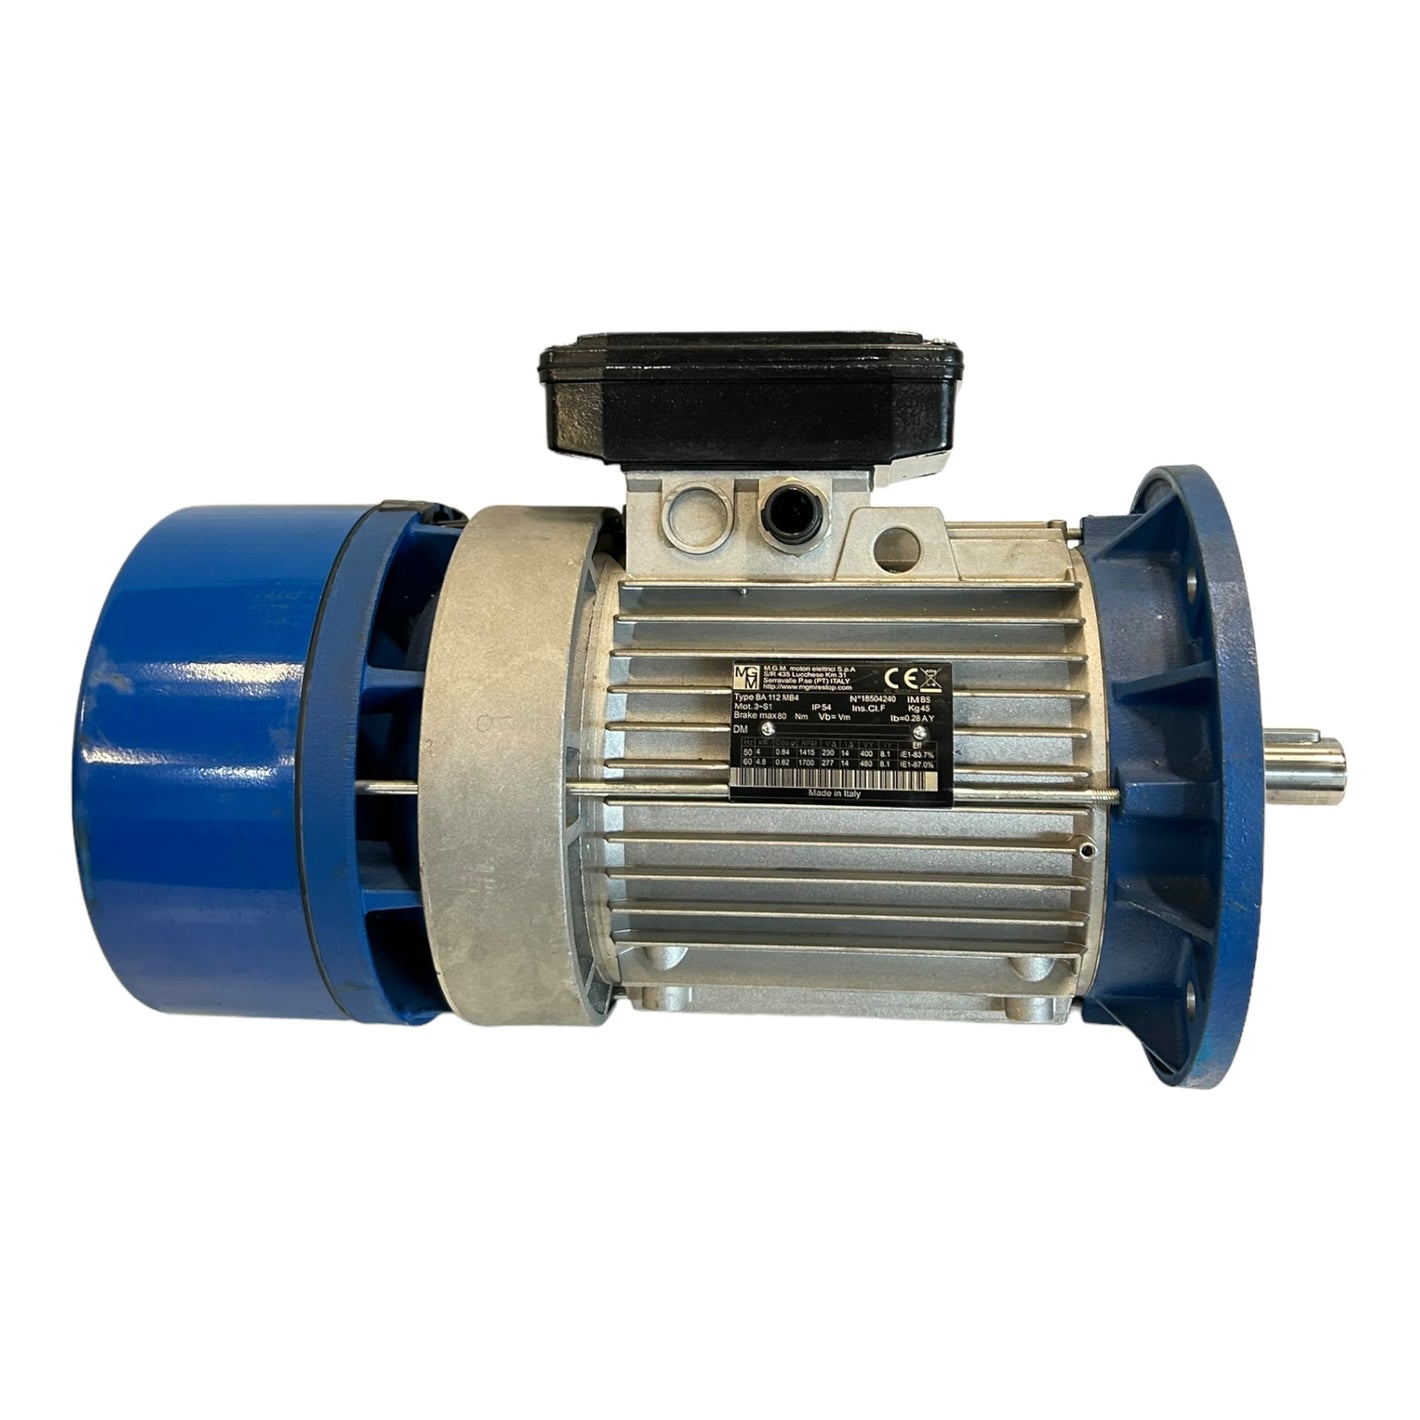 MGM BA112MB4 electric motor with brake 4kW IP54 230/400V industrial electric motor